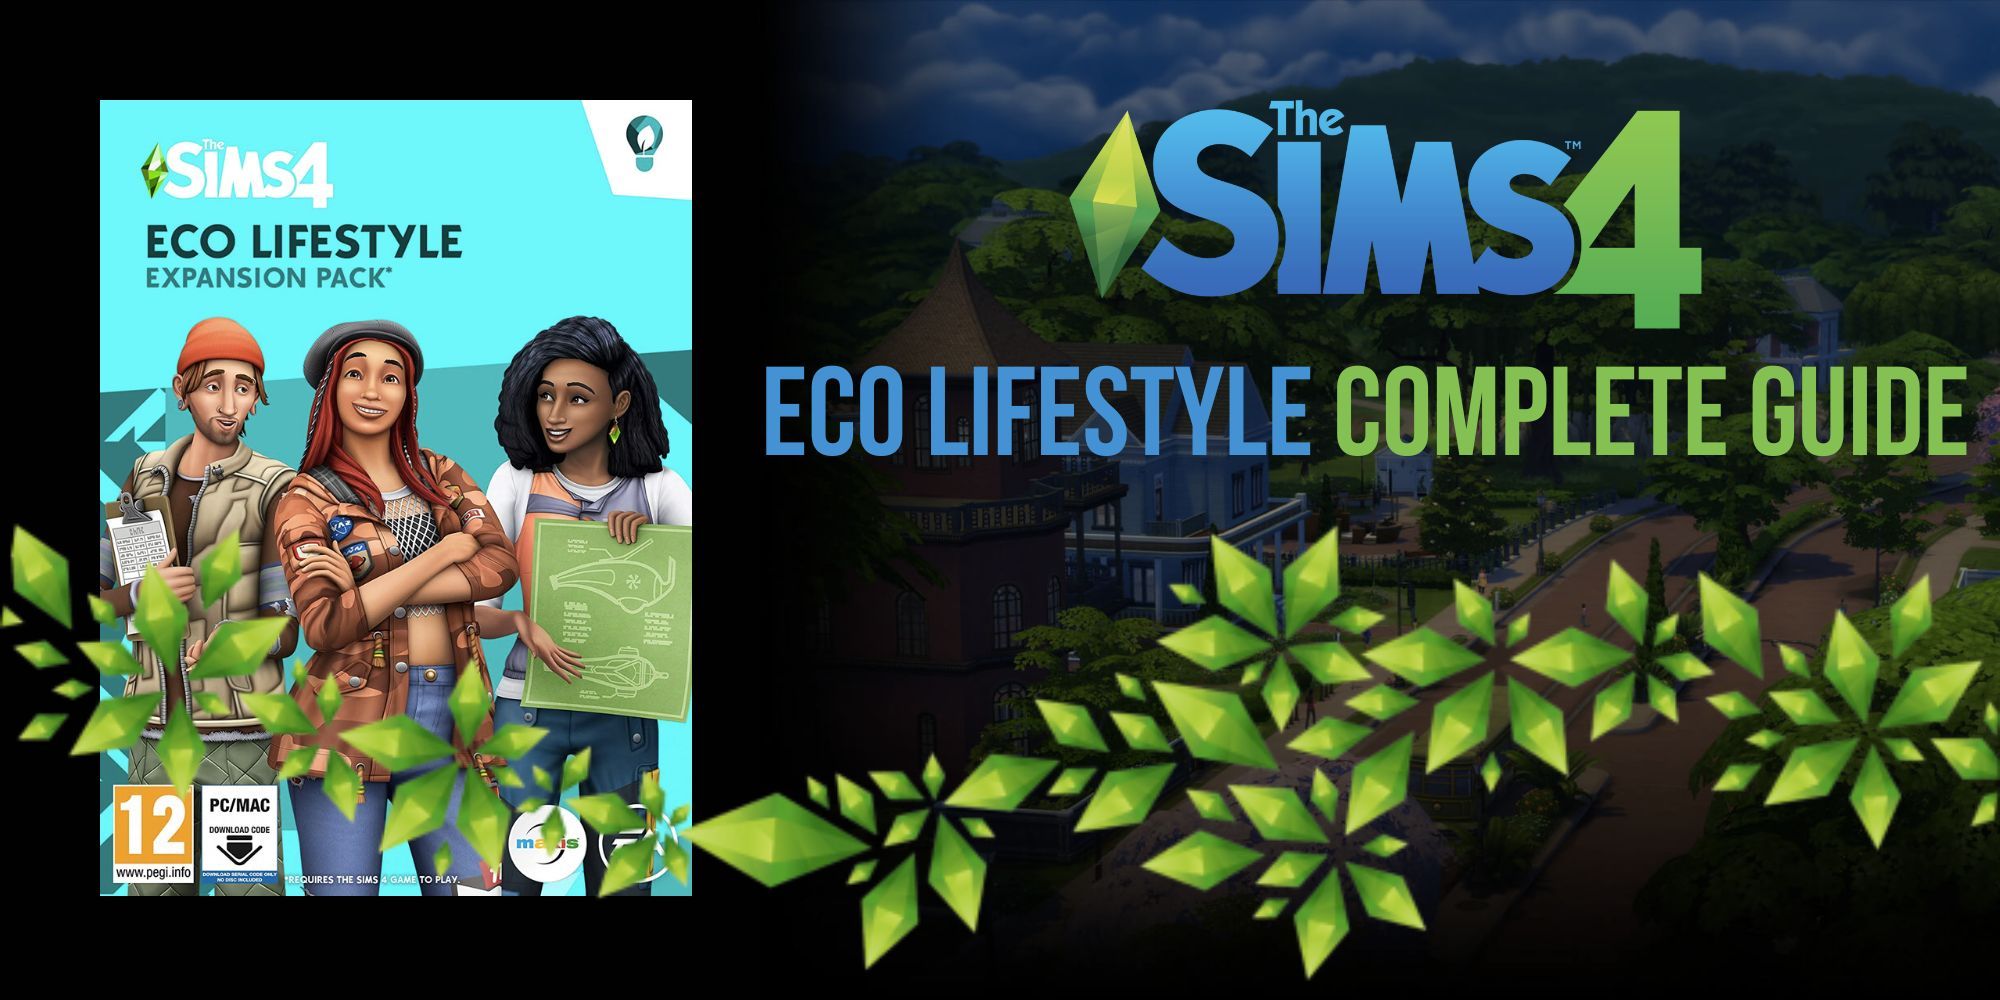 The Sims 4 Eco Lifestyle Complete Guide